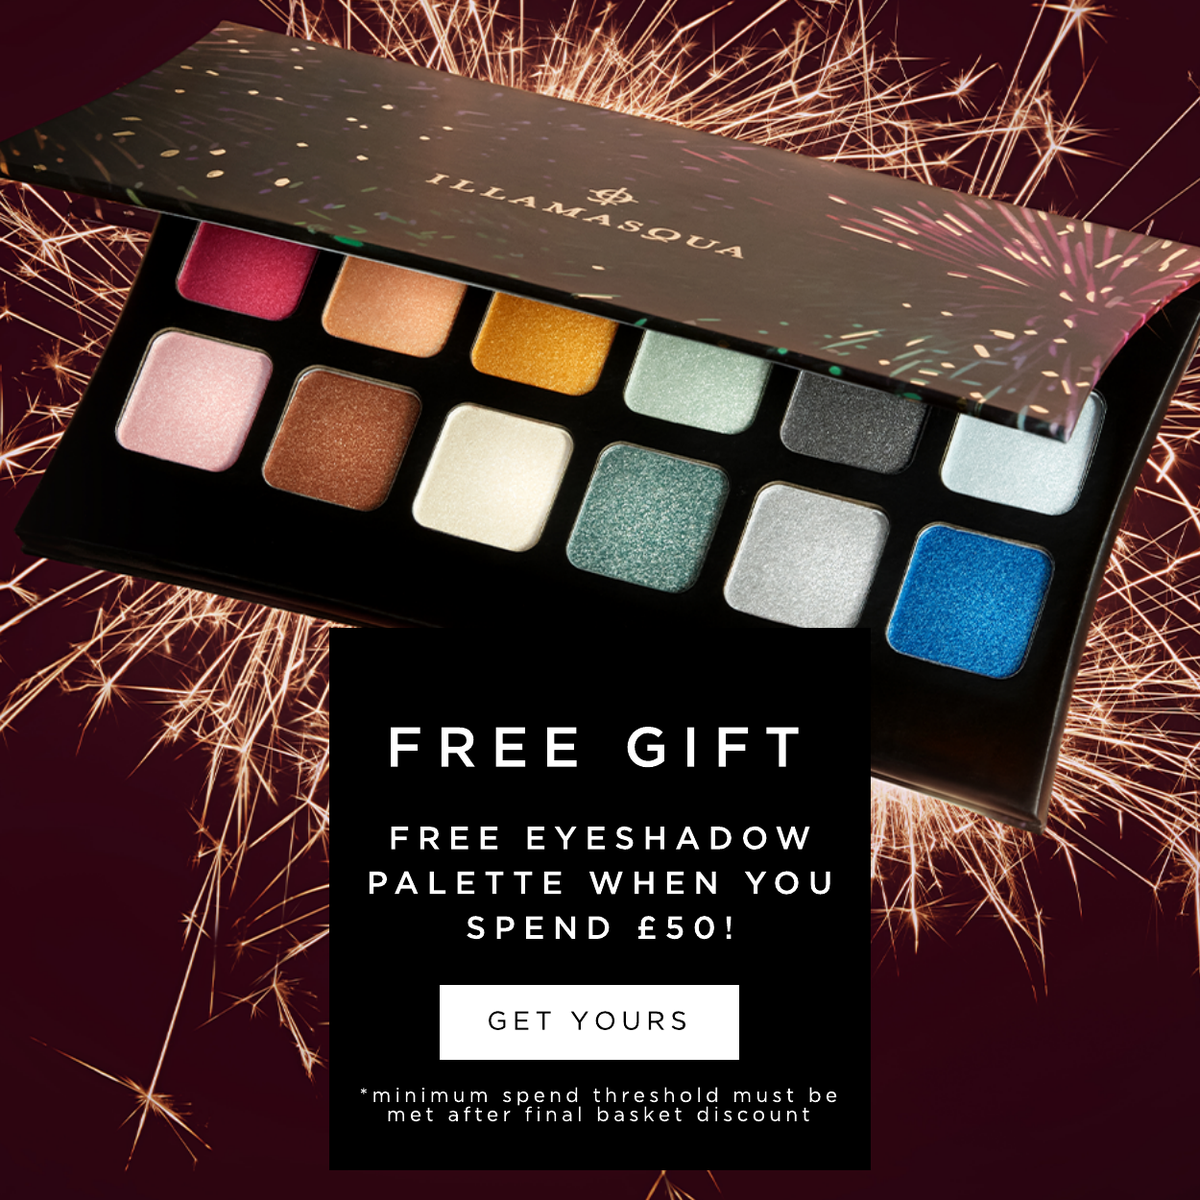 Receive an Eyeshadow Palette When you Spend £50